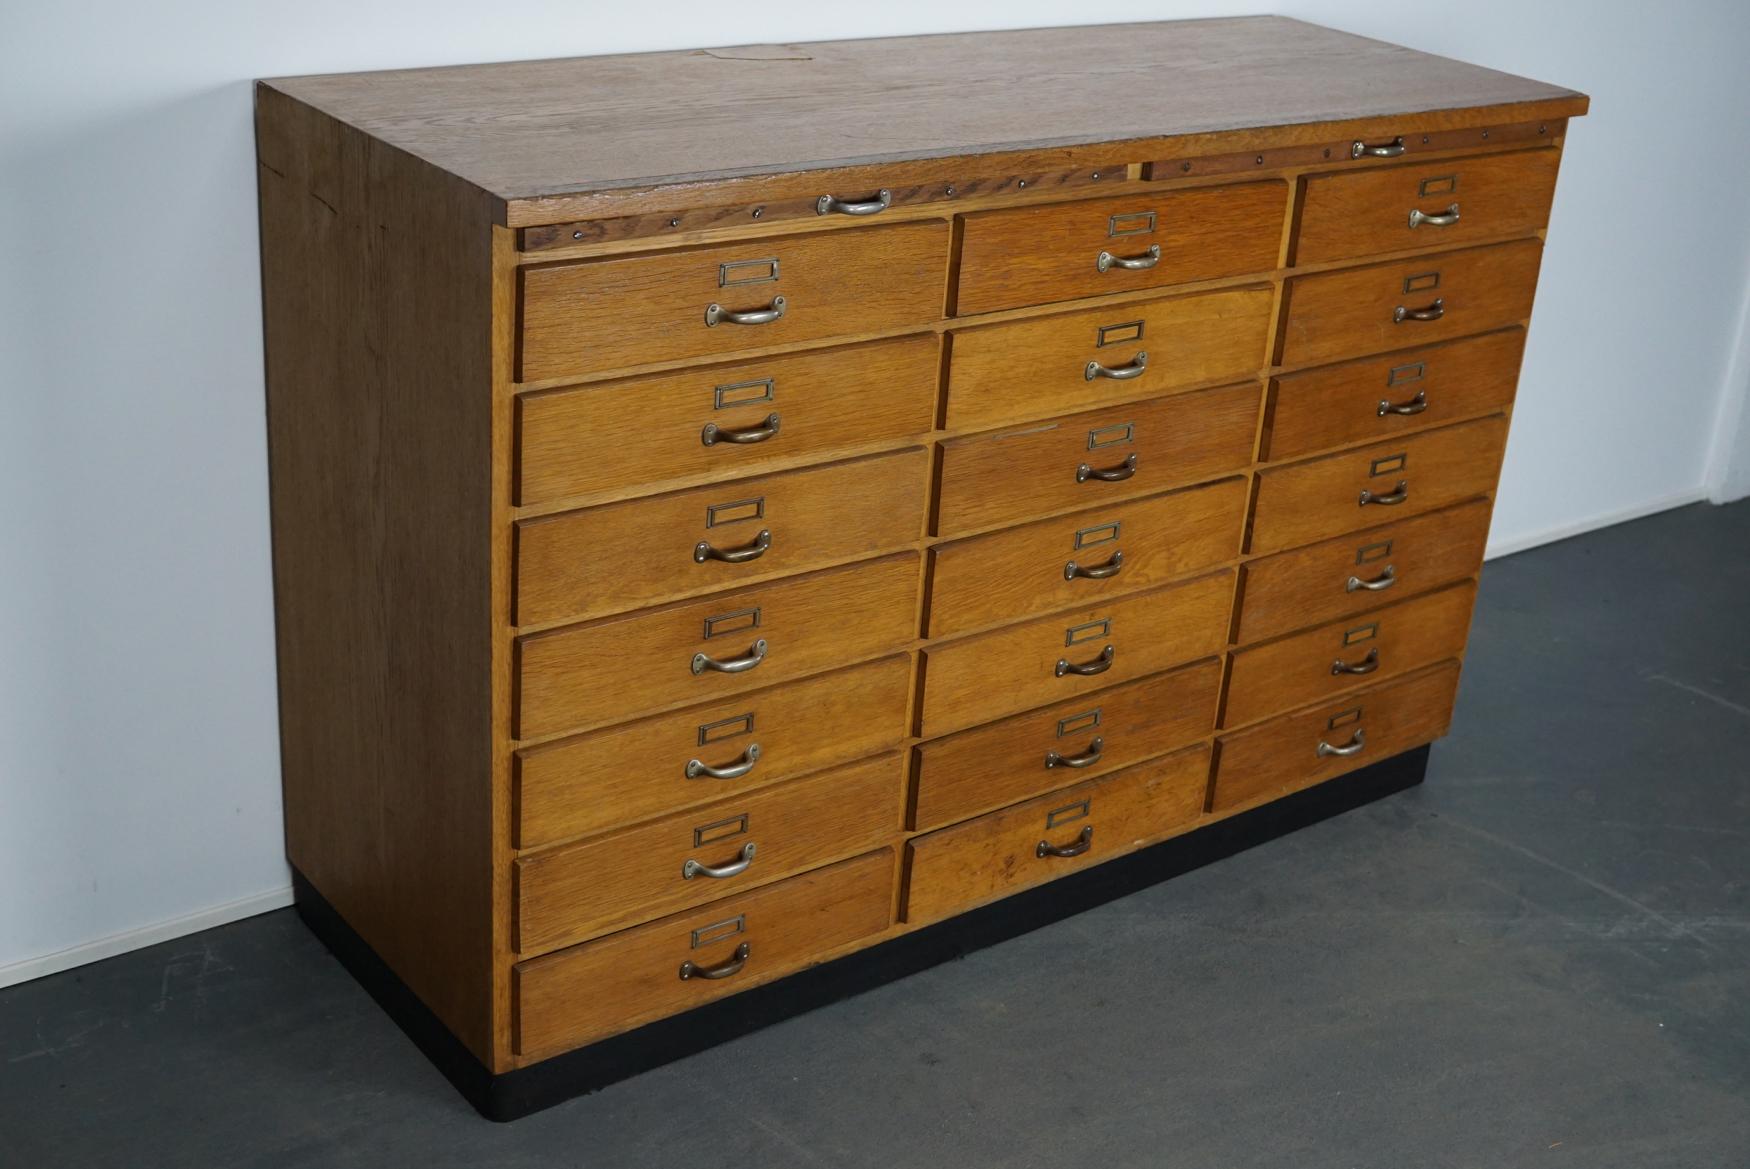 This apothecary cabinet was produced during the 1950s in Germany. This piece features 24 drawers with nice metal handles and card holders. The interior dimensions of the drawers are: D x W x H 45.5 x 43 x 7.5 cm.
